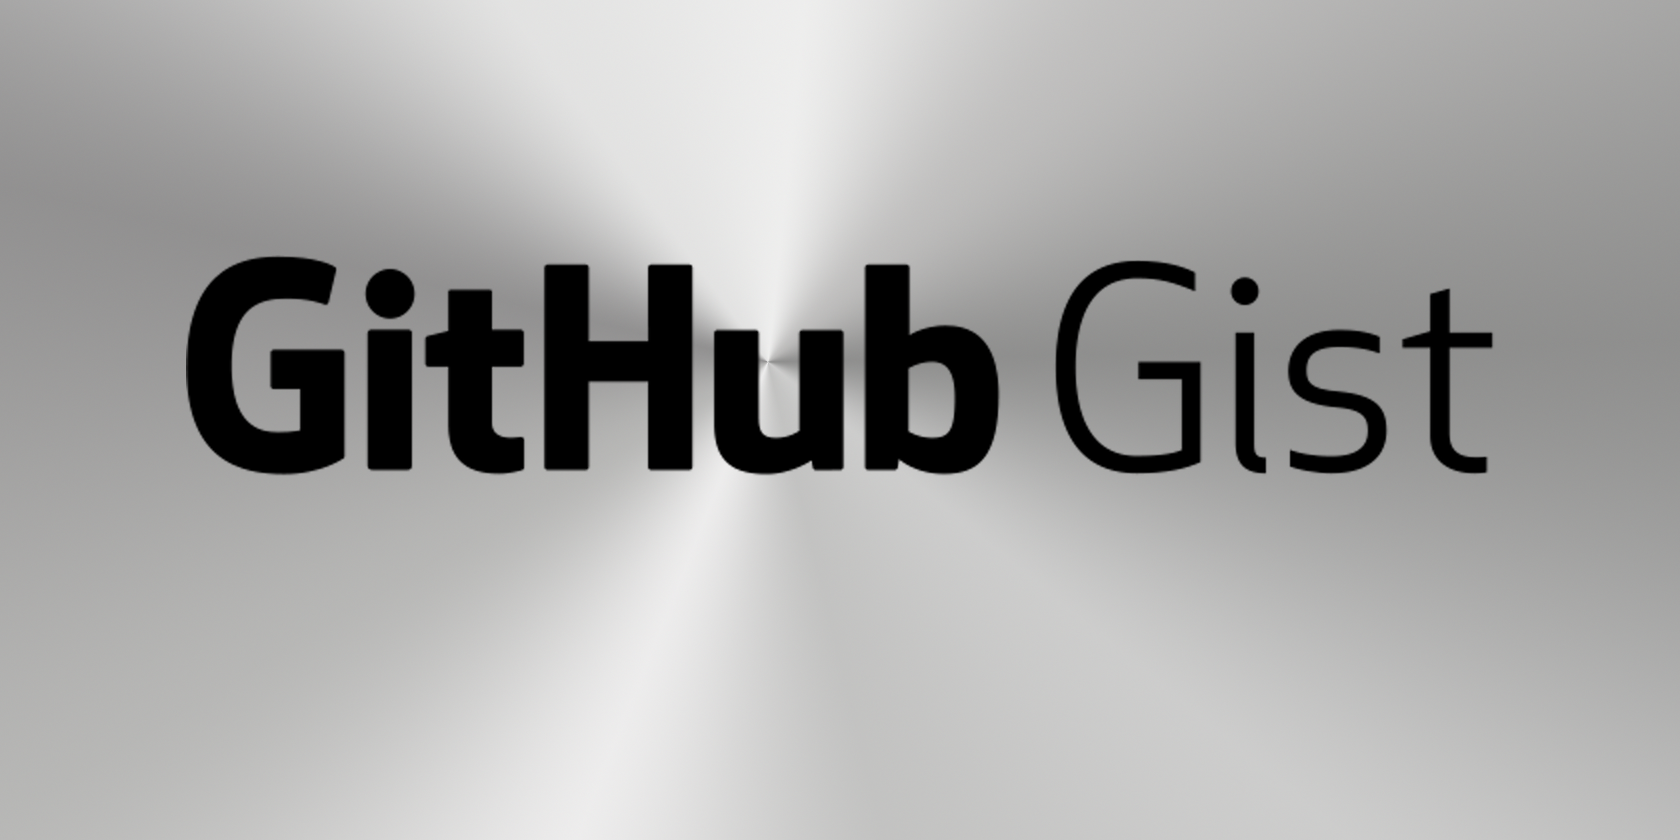 The GitHub Gist logo on a gradient background